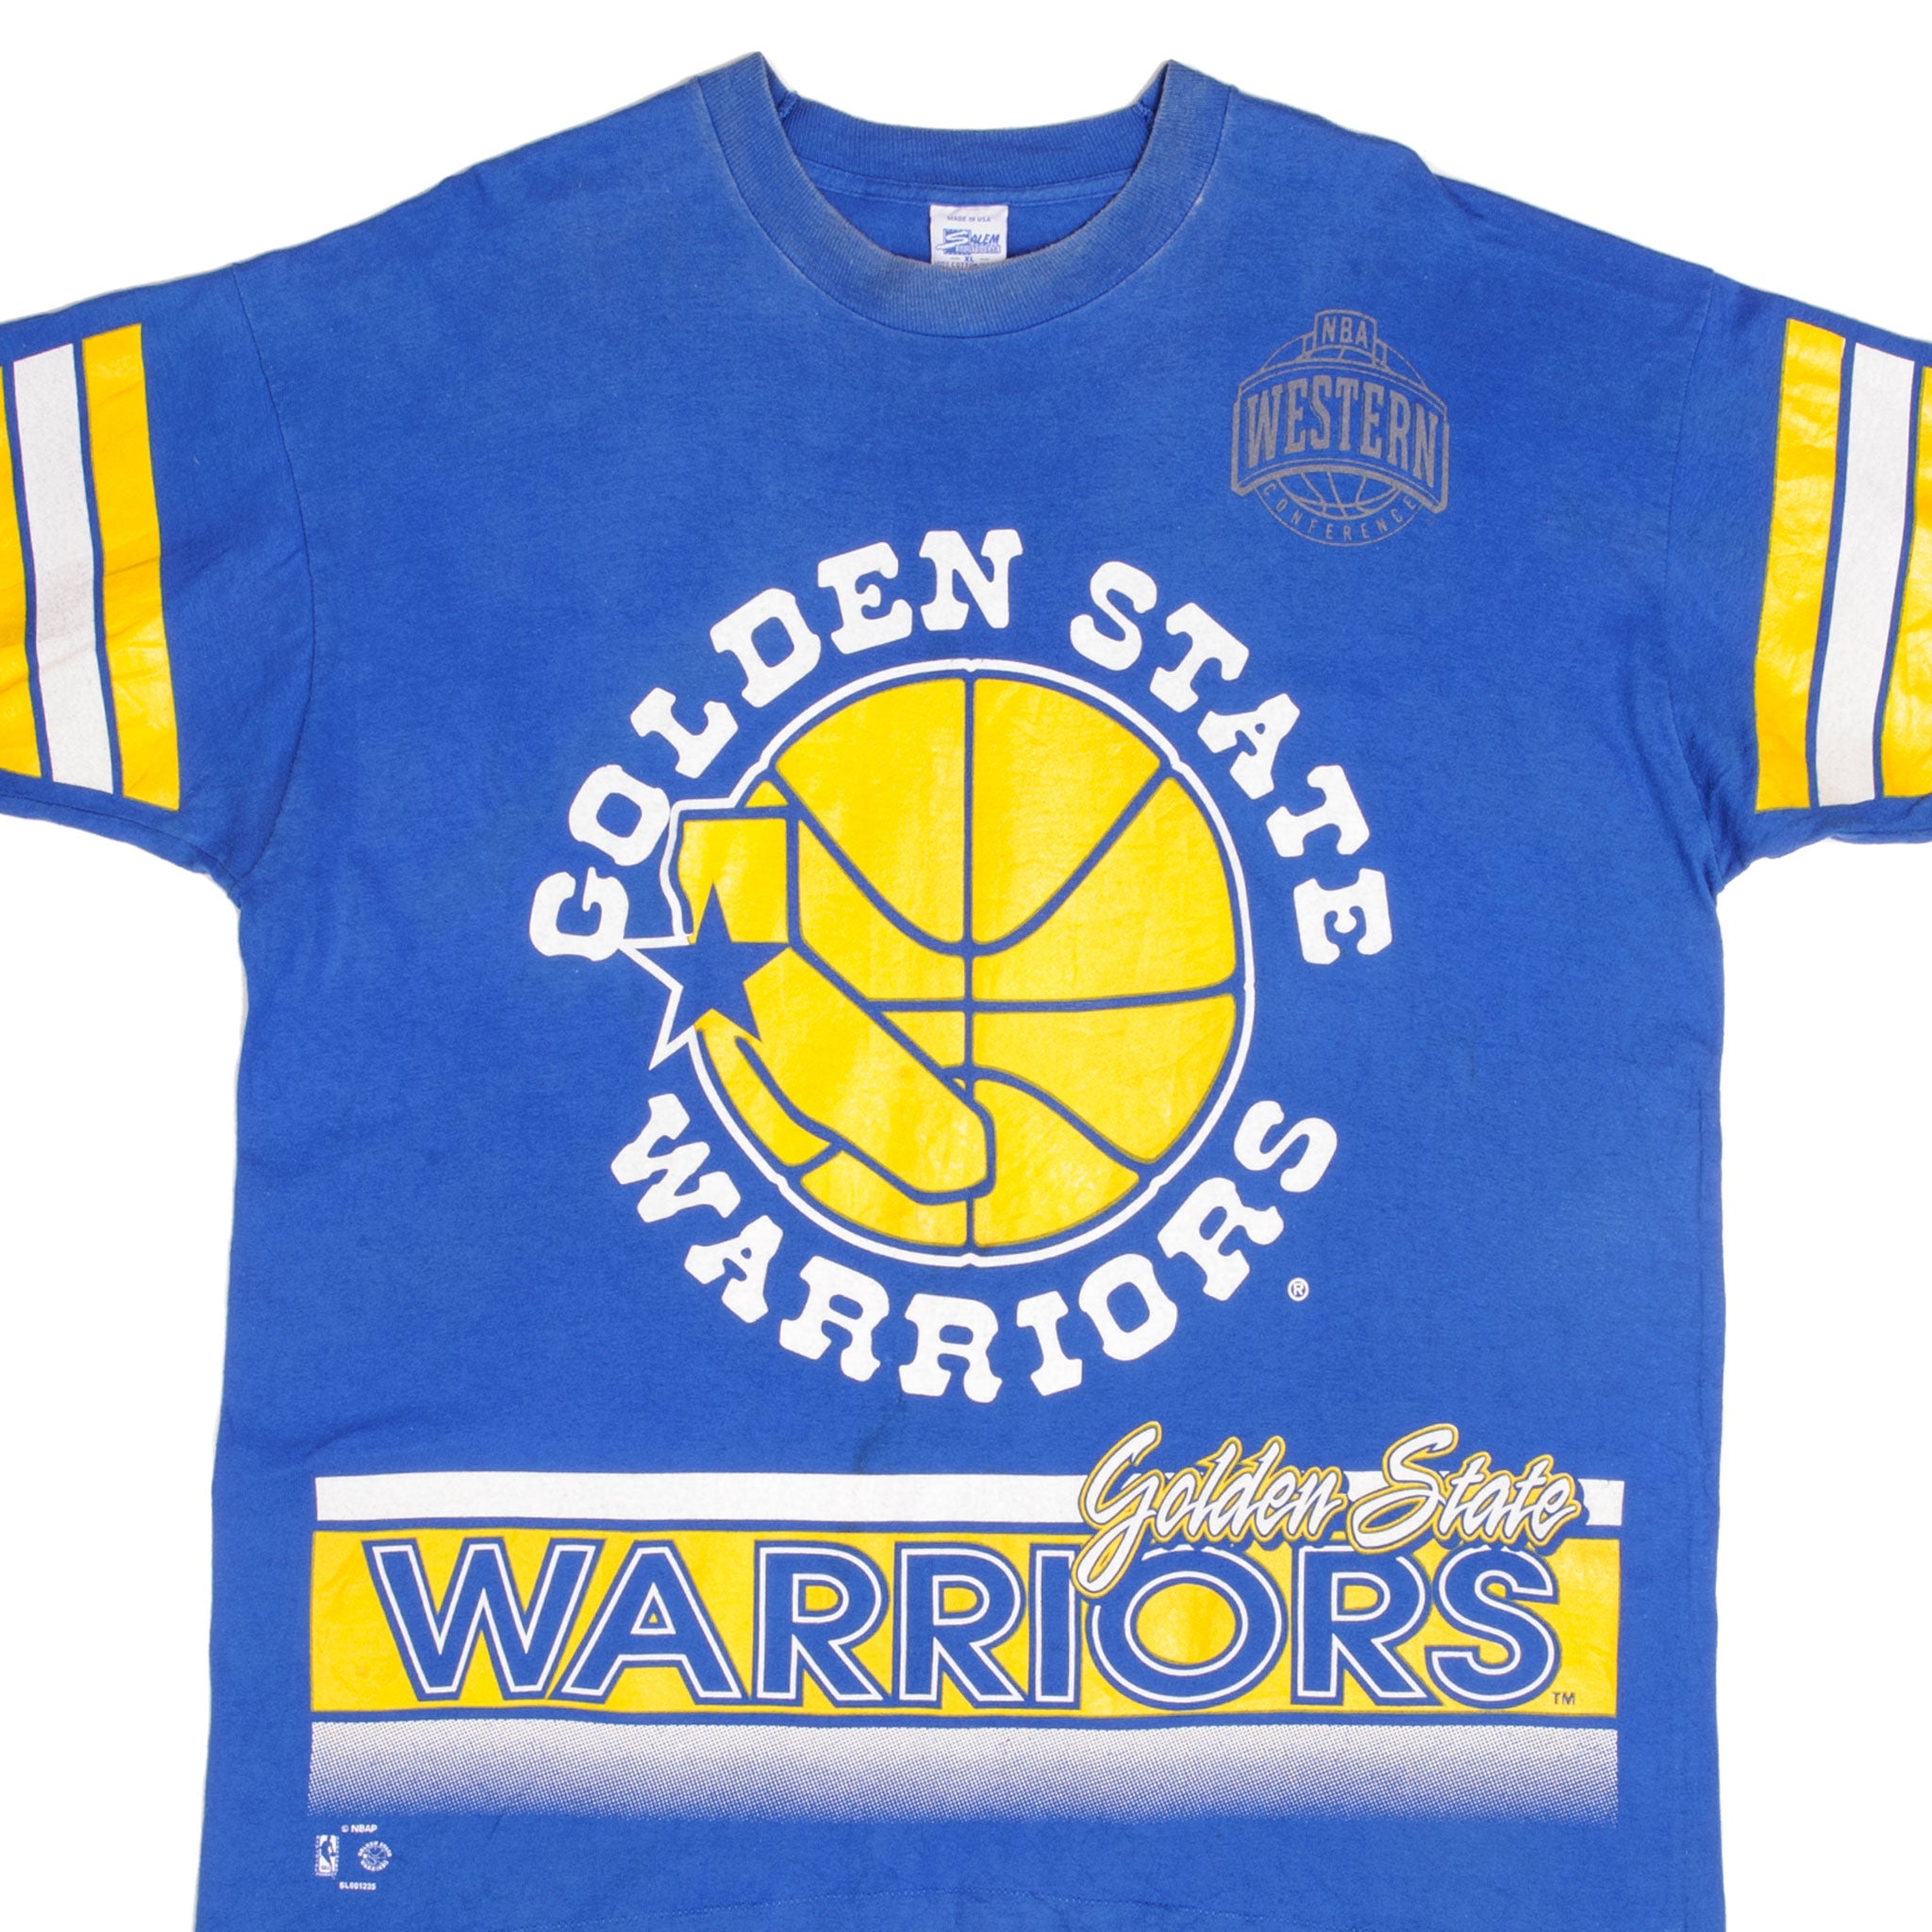 Vintage NBA Golden State Warrior Tee Shirt Size XL Made in USA